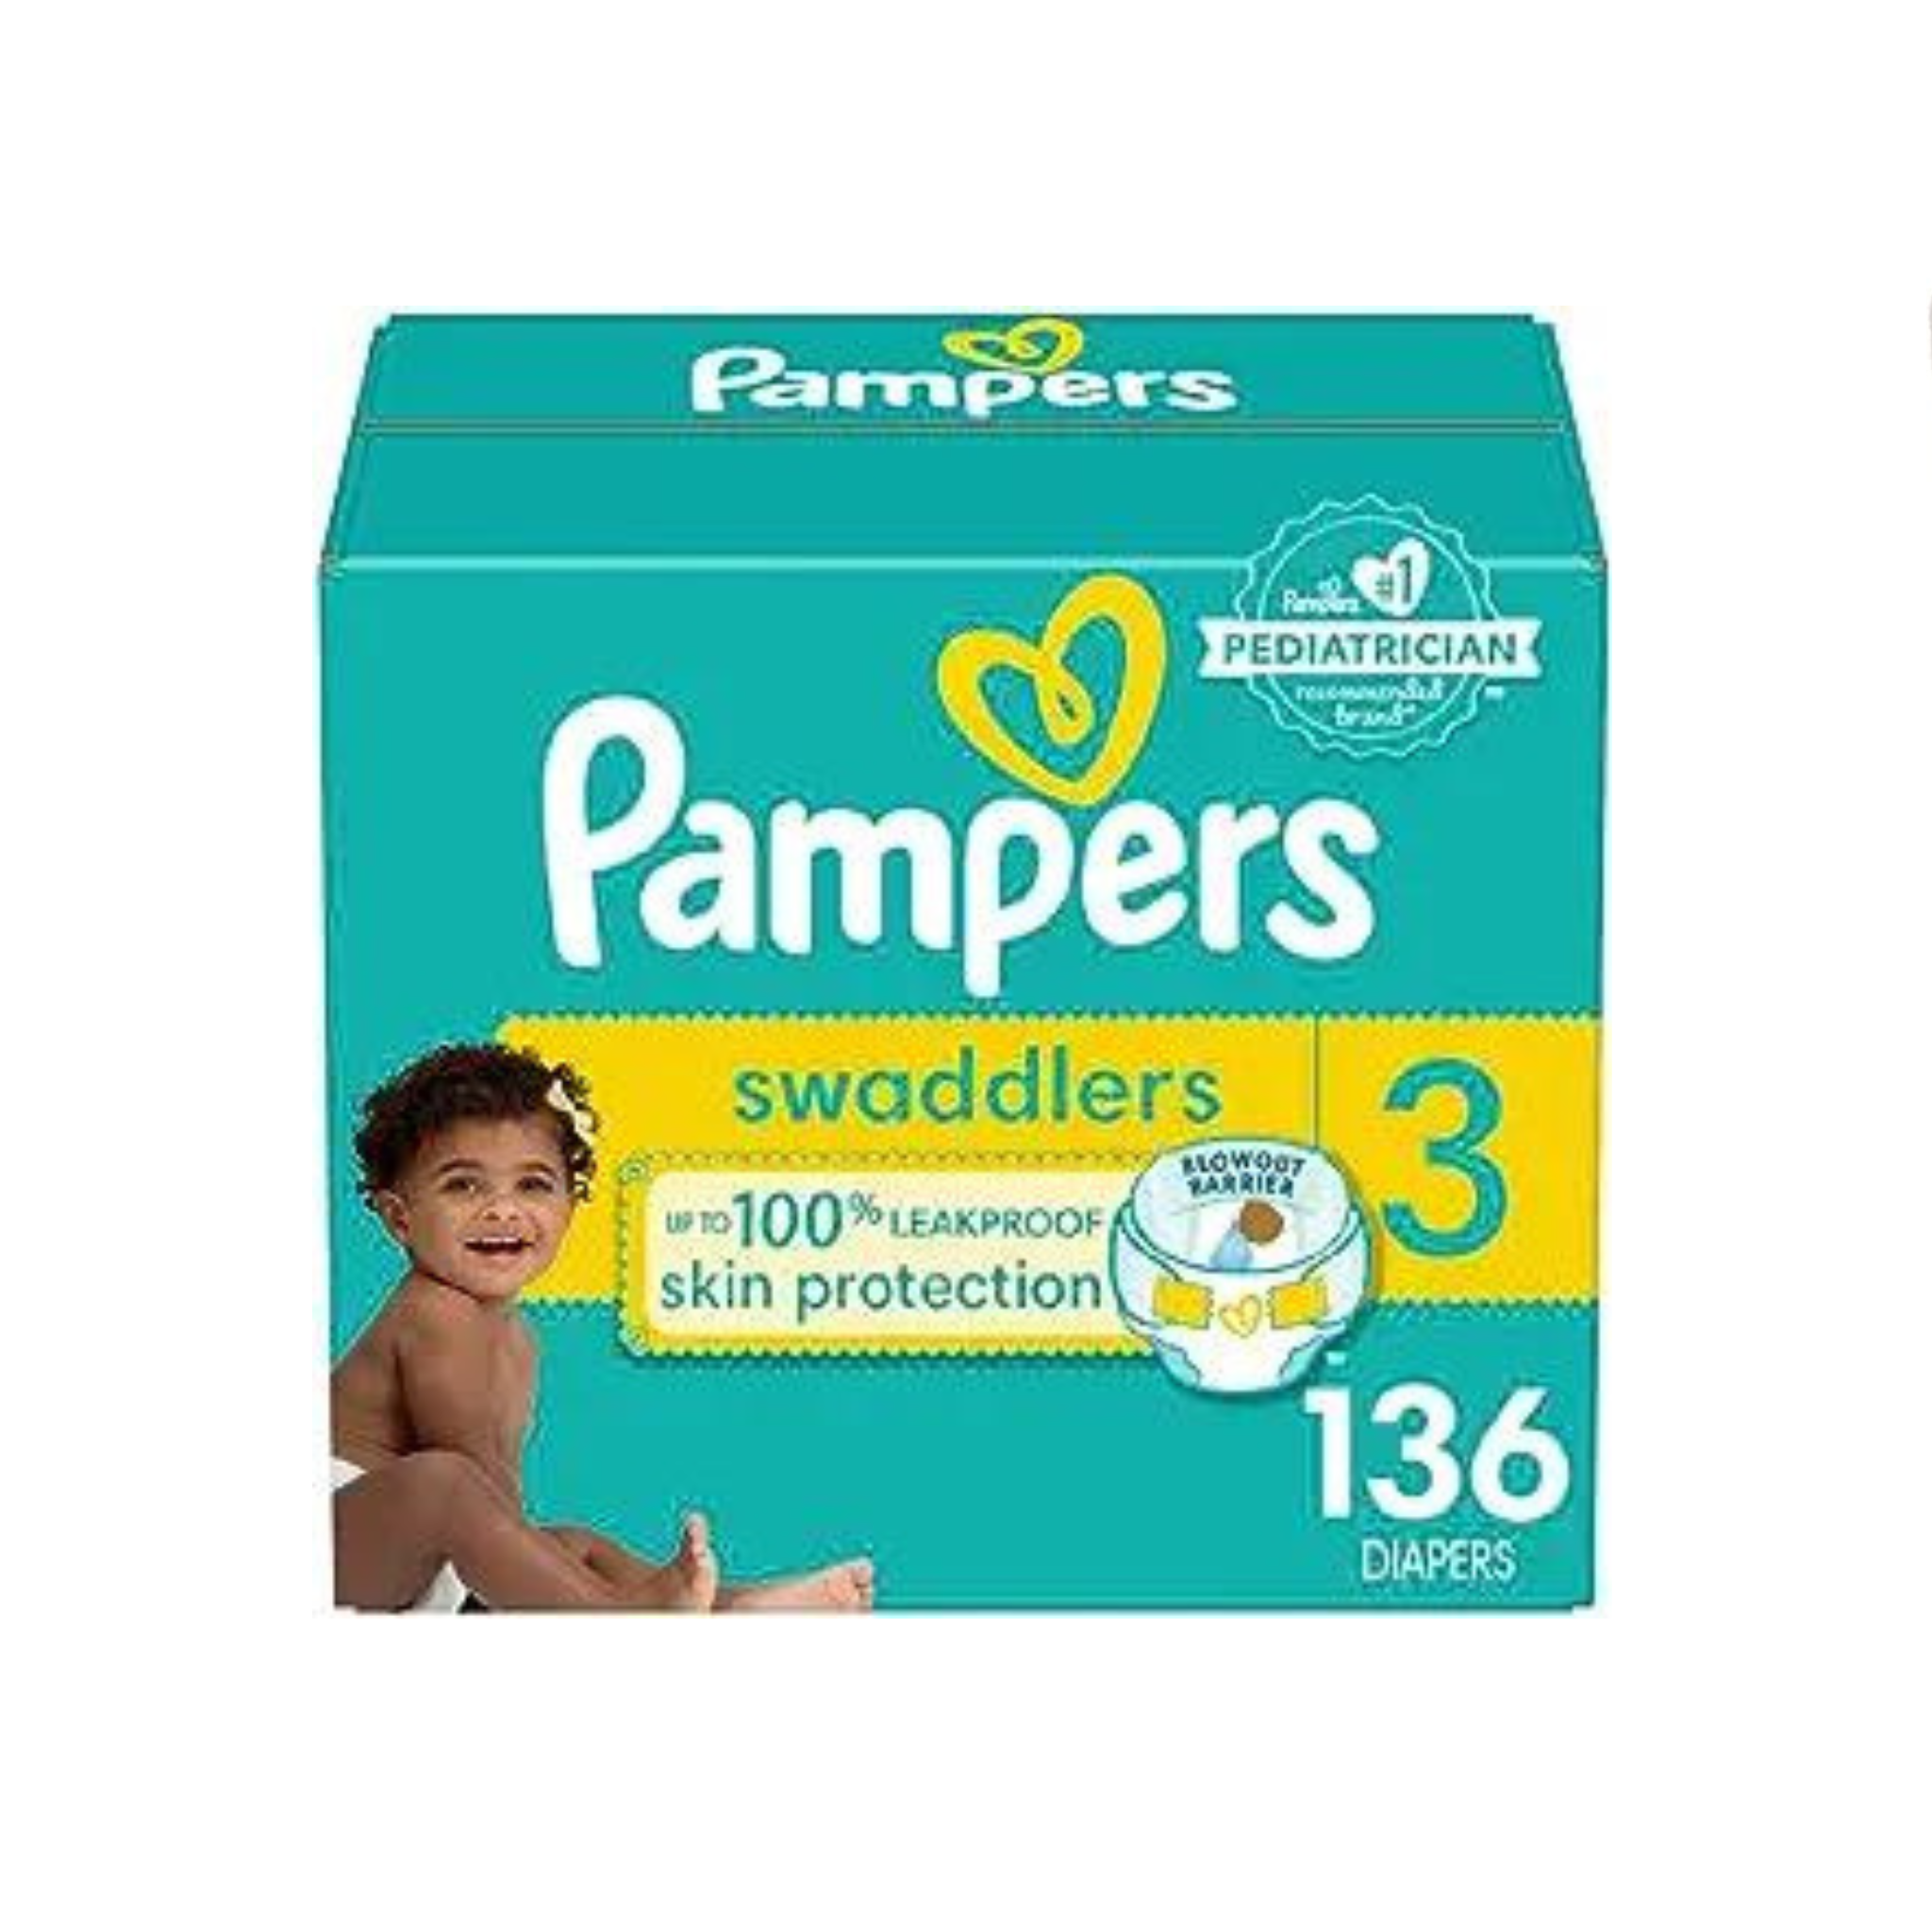 Pampers Swaddlers Diapers Size 3, 136 count – Disposable Diapers